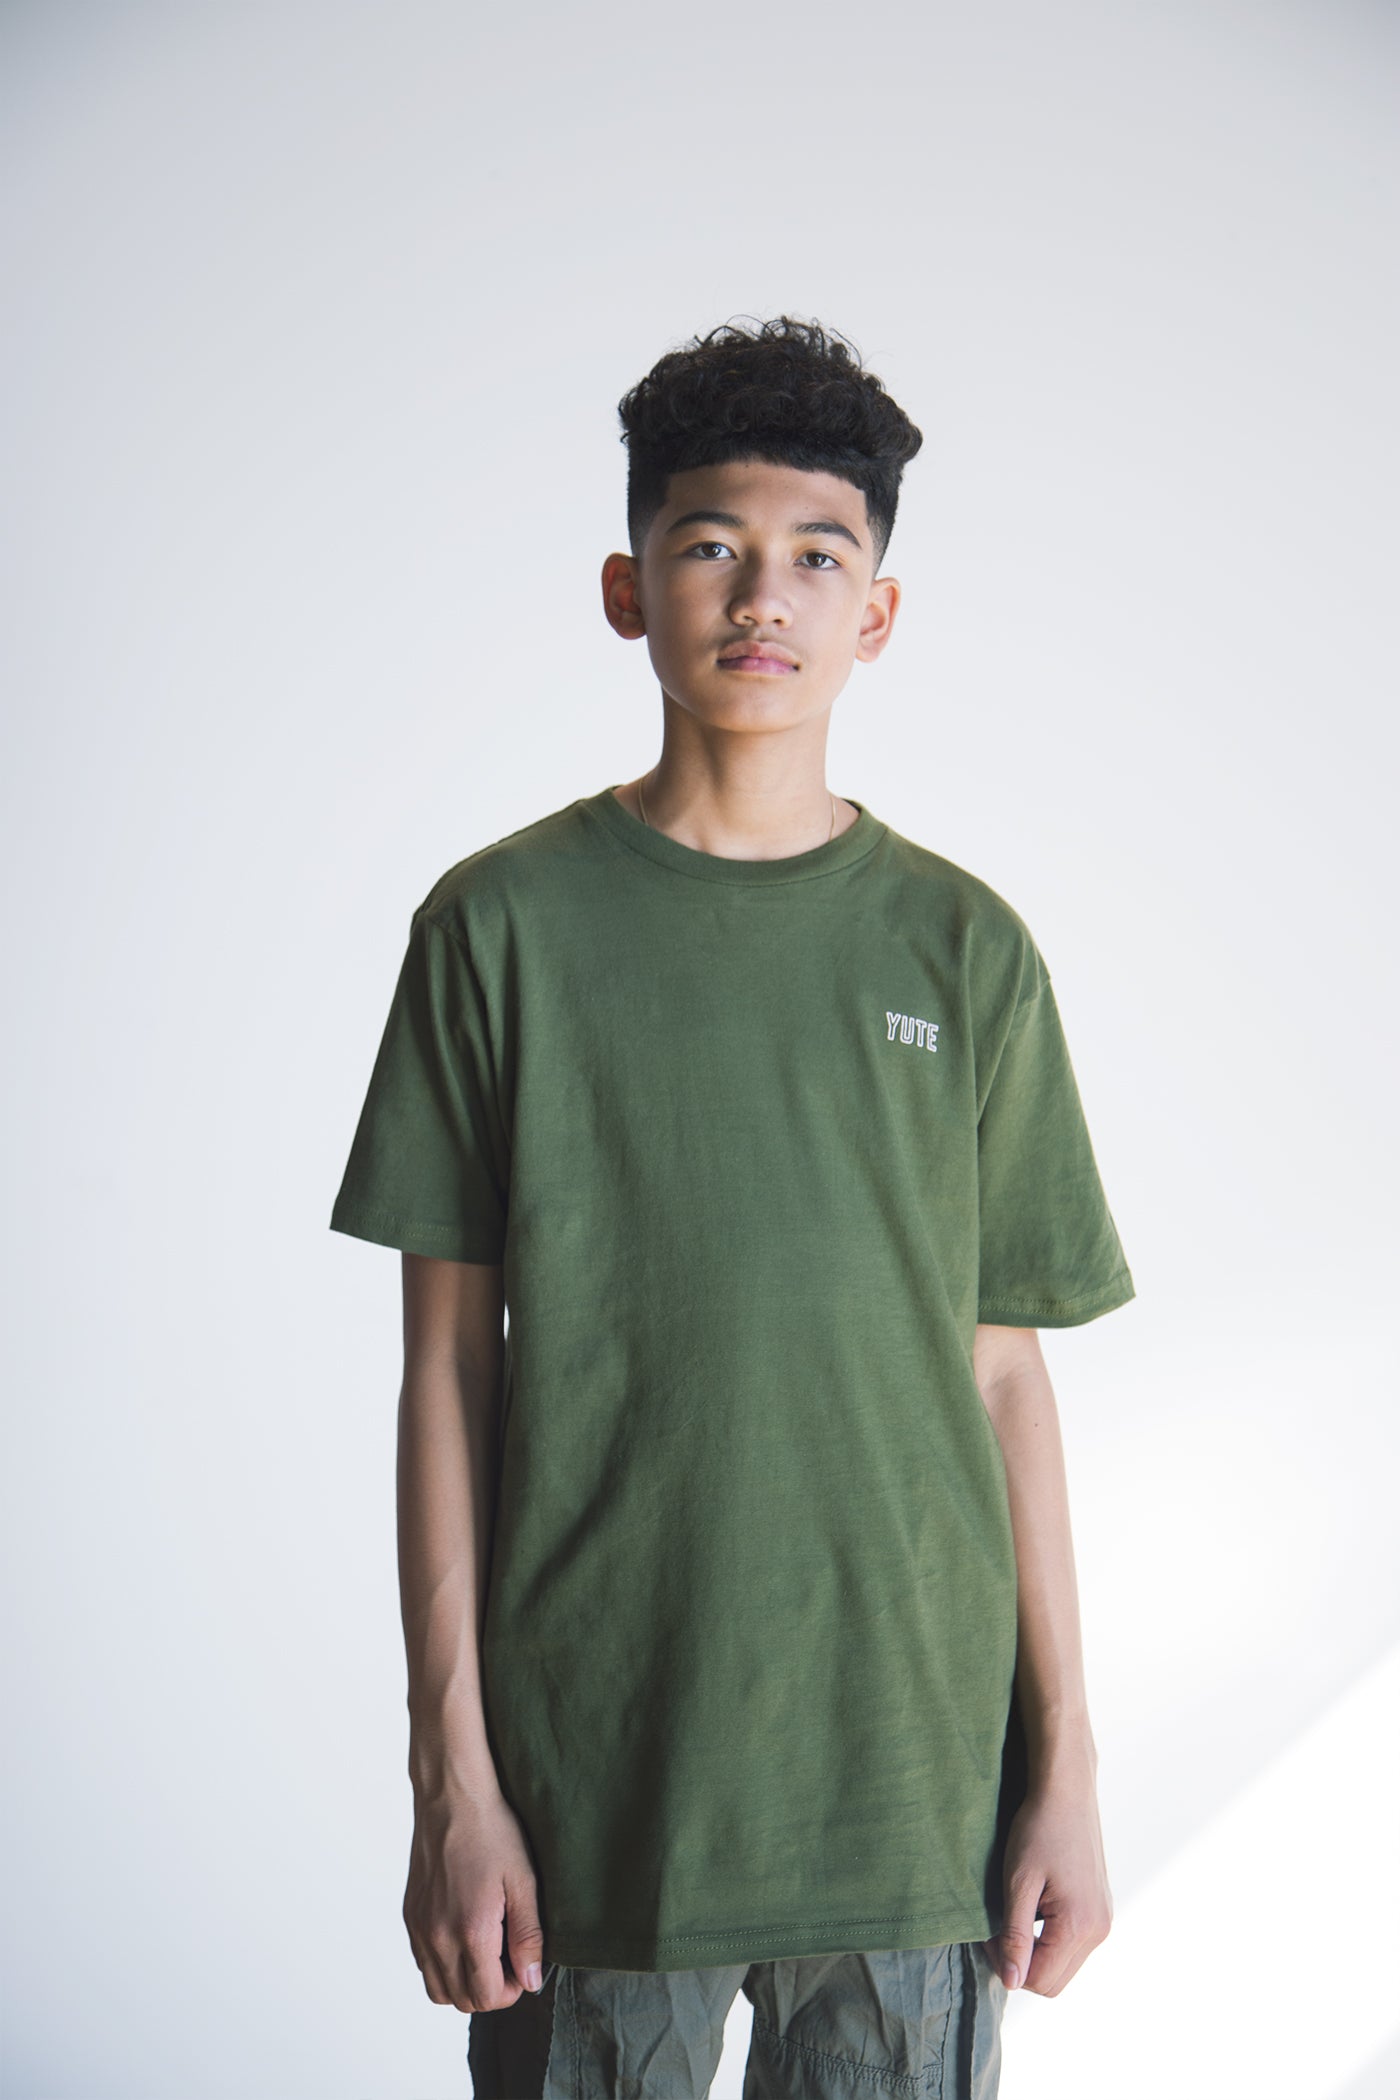 T-Shirt: Don't Be A Waste YUTE (olive)